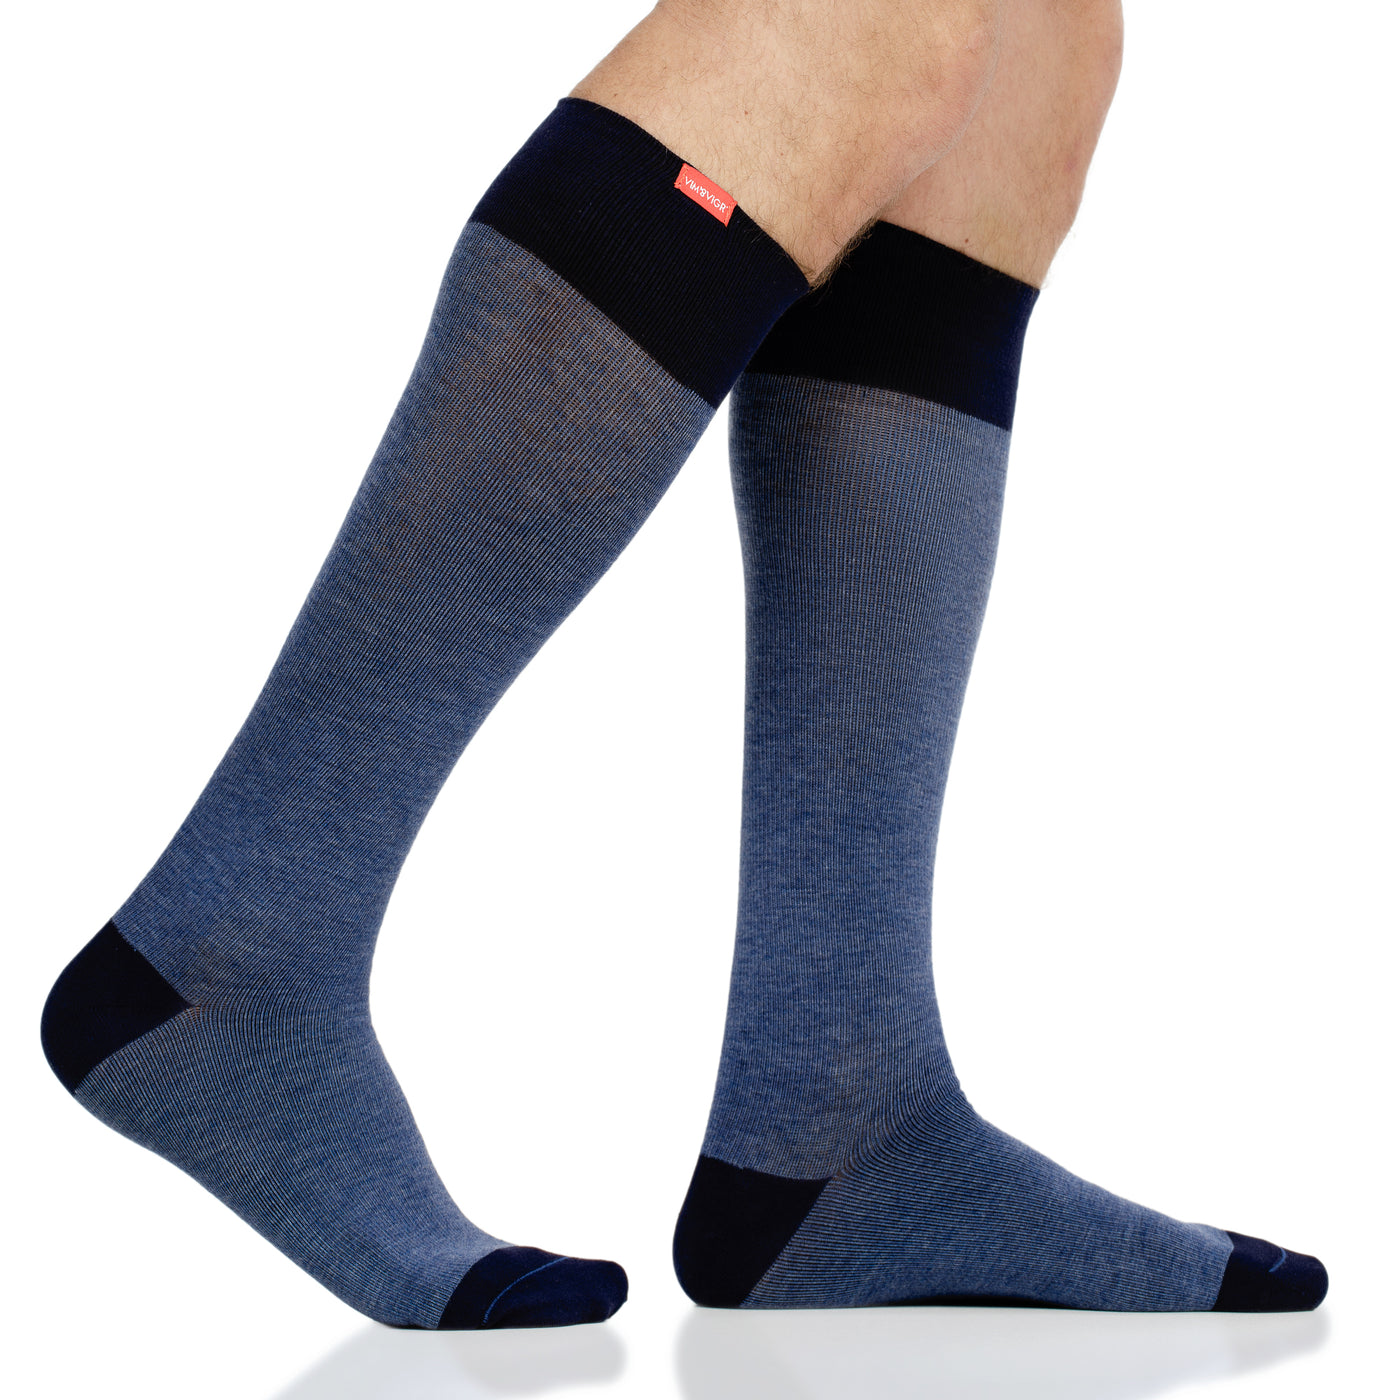 30-40 mmHg: Heathered Navy Collection (Cotton) compression socks